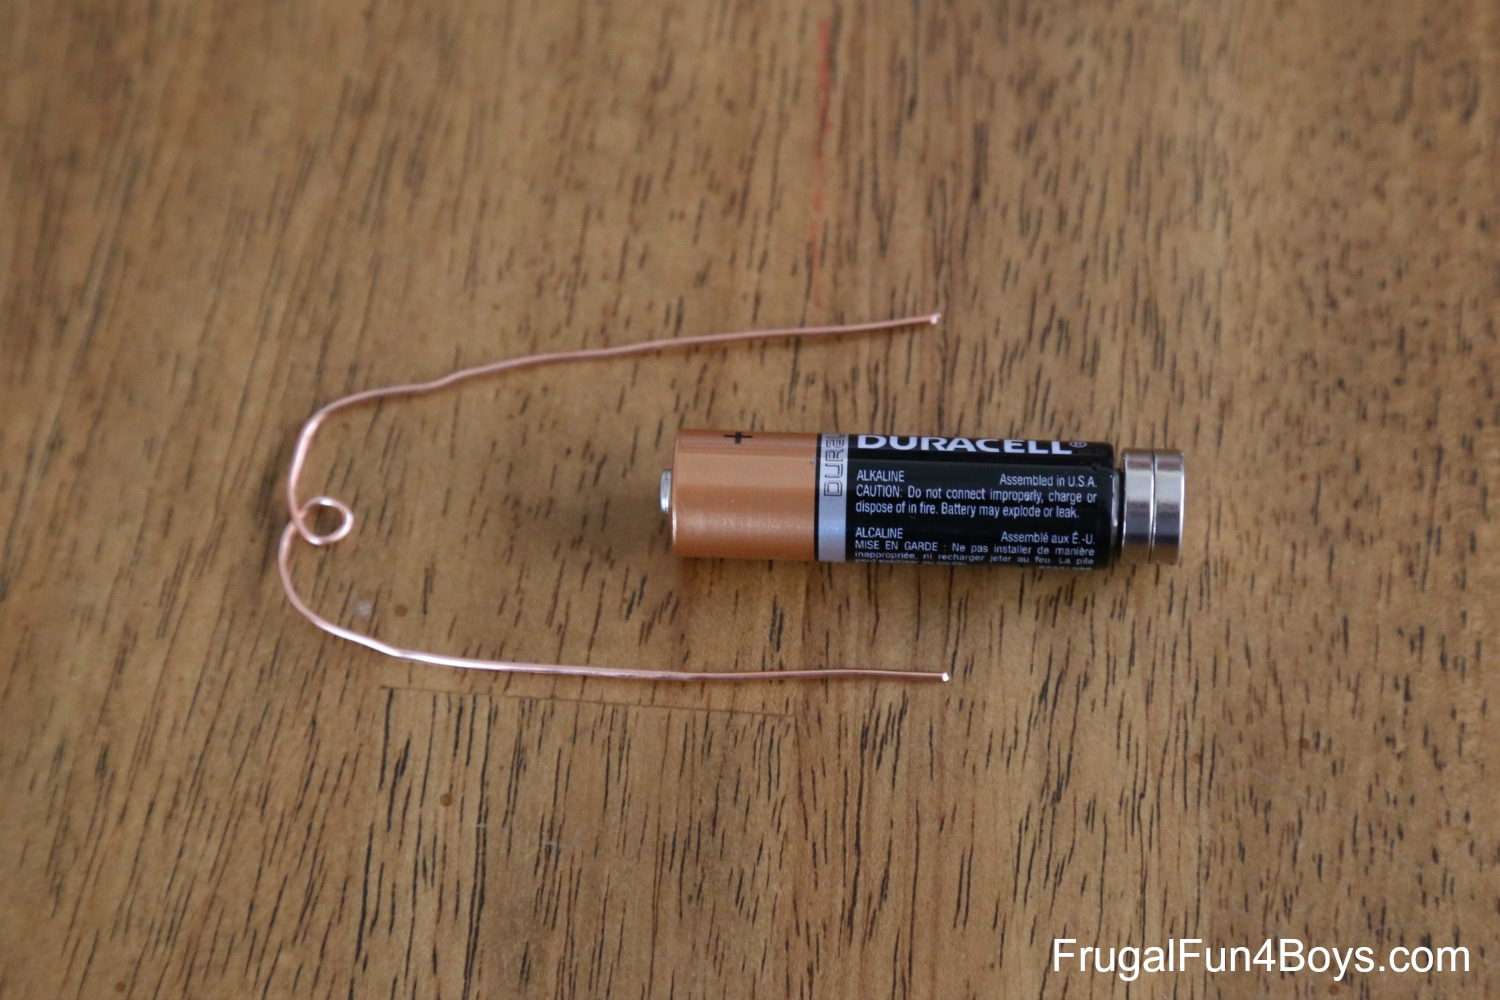 How to start a fire with a battery and wire Build A Simple Electric Motor Homopolar Motor Frugal Fun For Boys And Girls